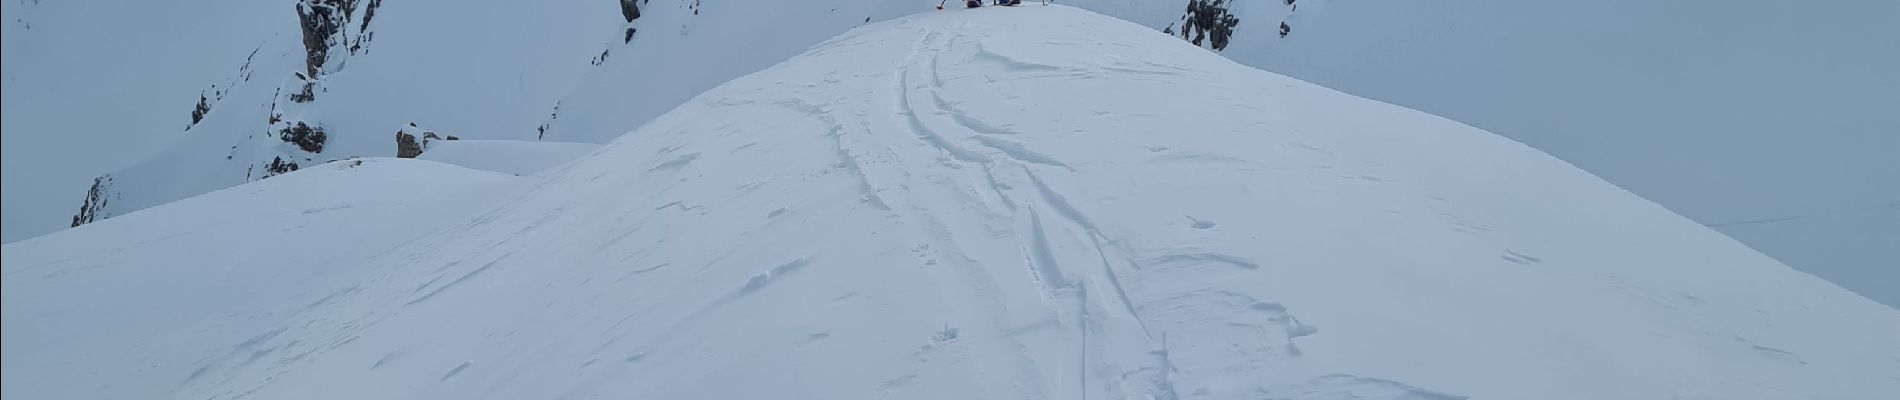 Trail Touring skiing Névache - roche gauthier couloir nord - Photo